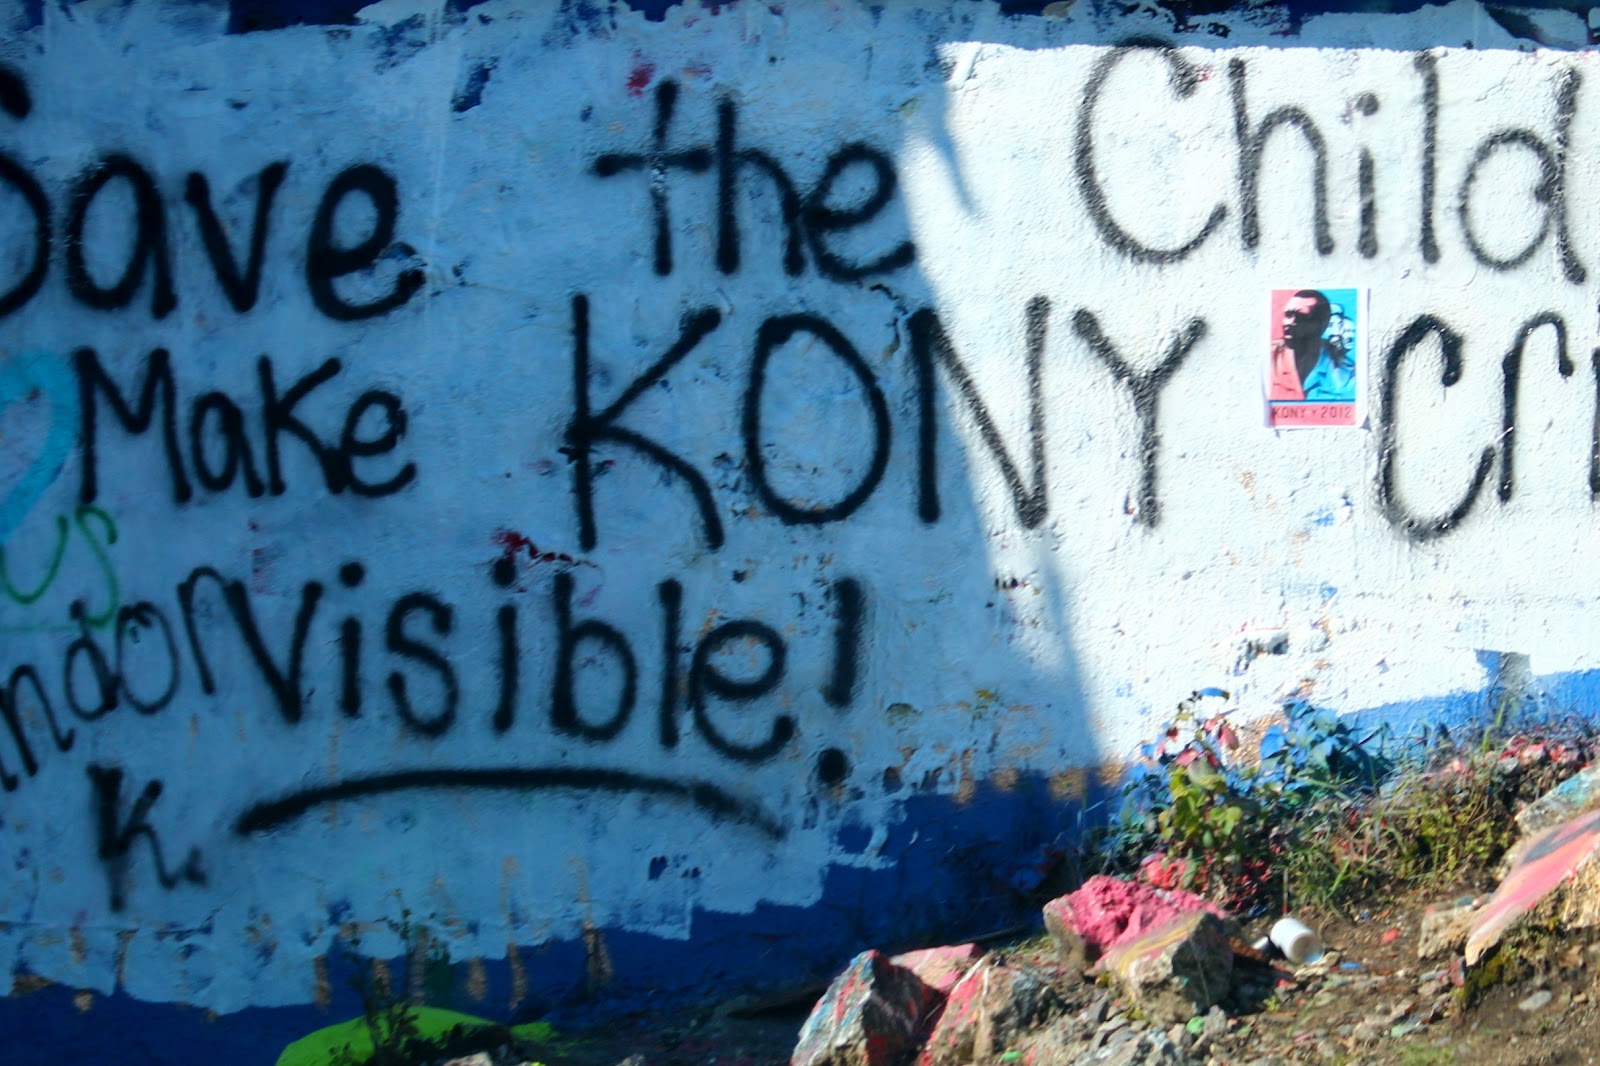 As all things important in Pensacola, Kony 2012 adorned the Pensacola ...